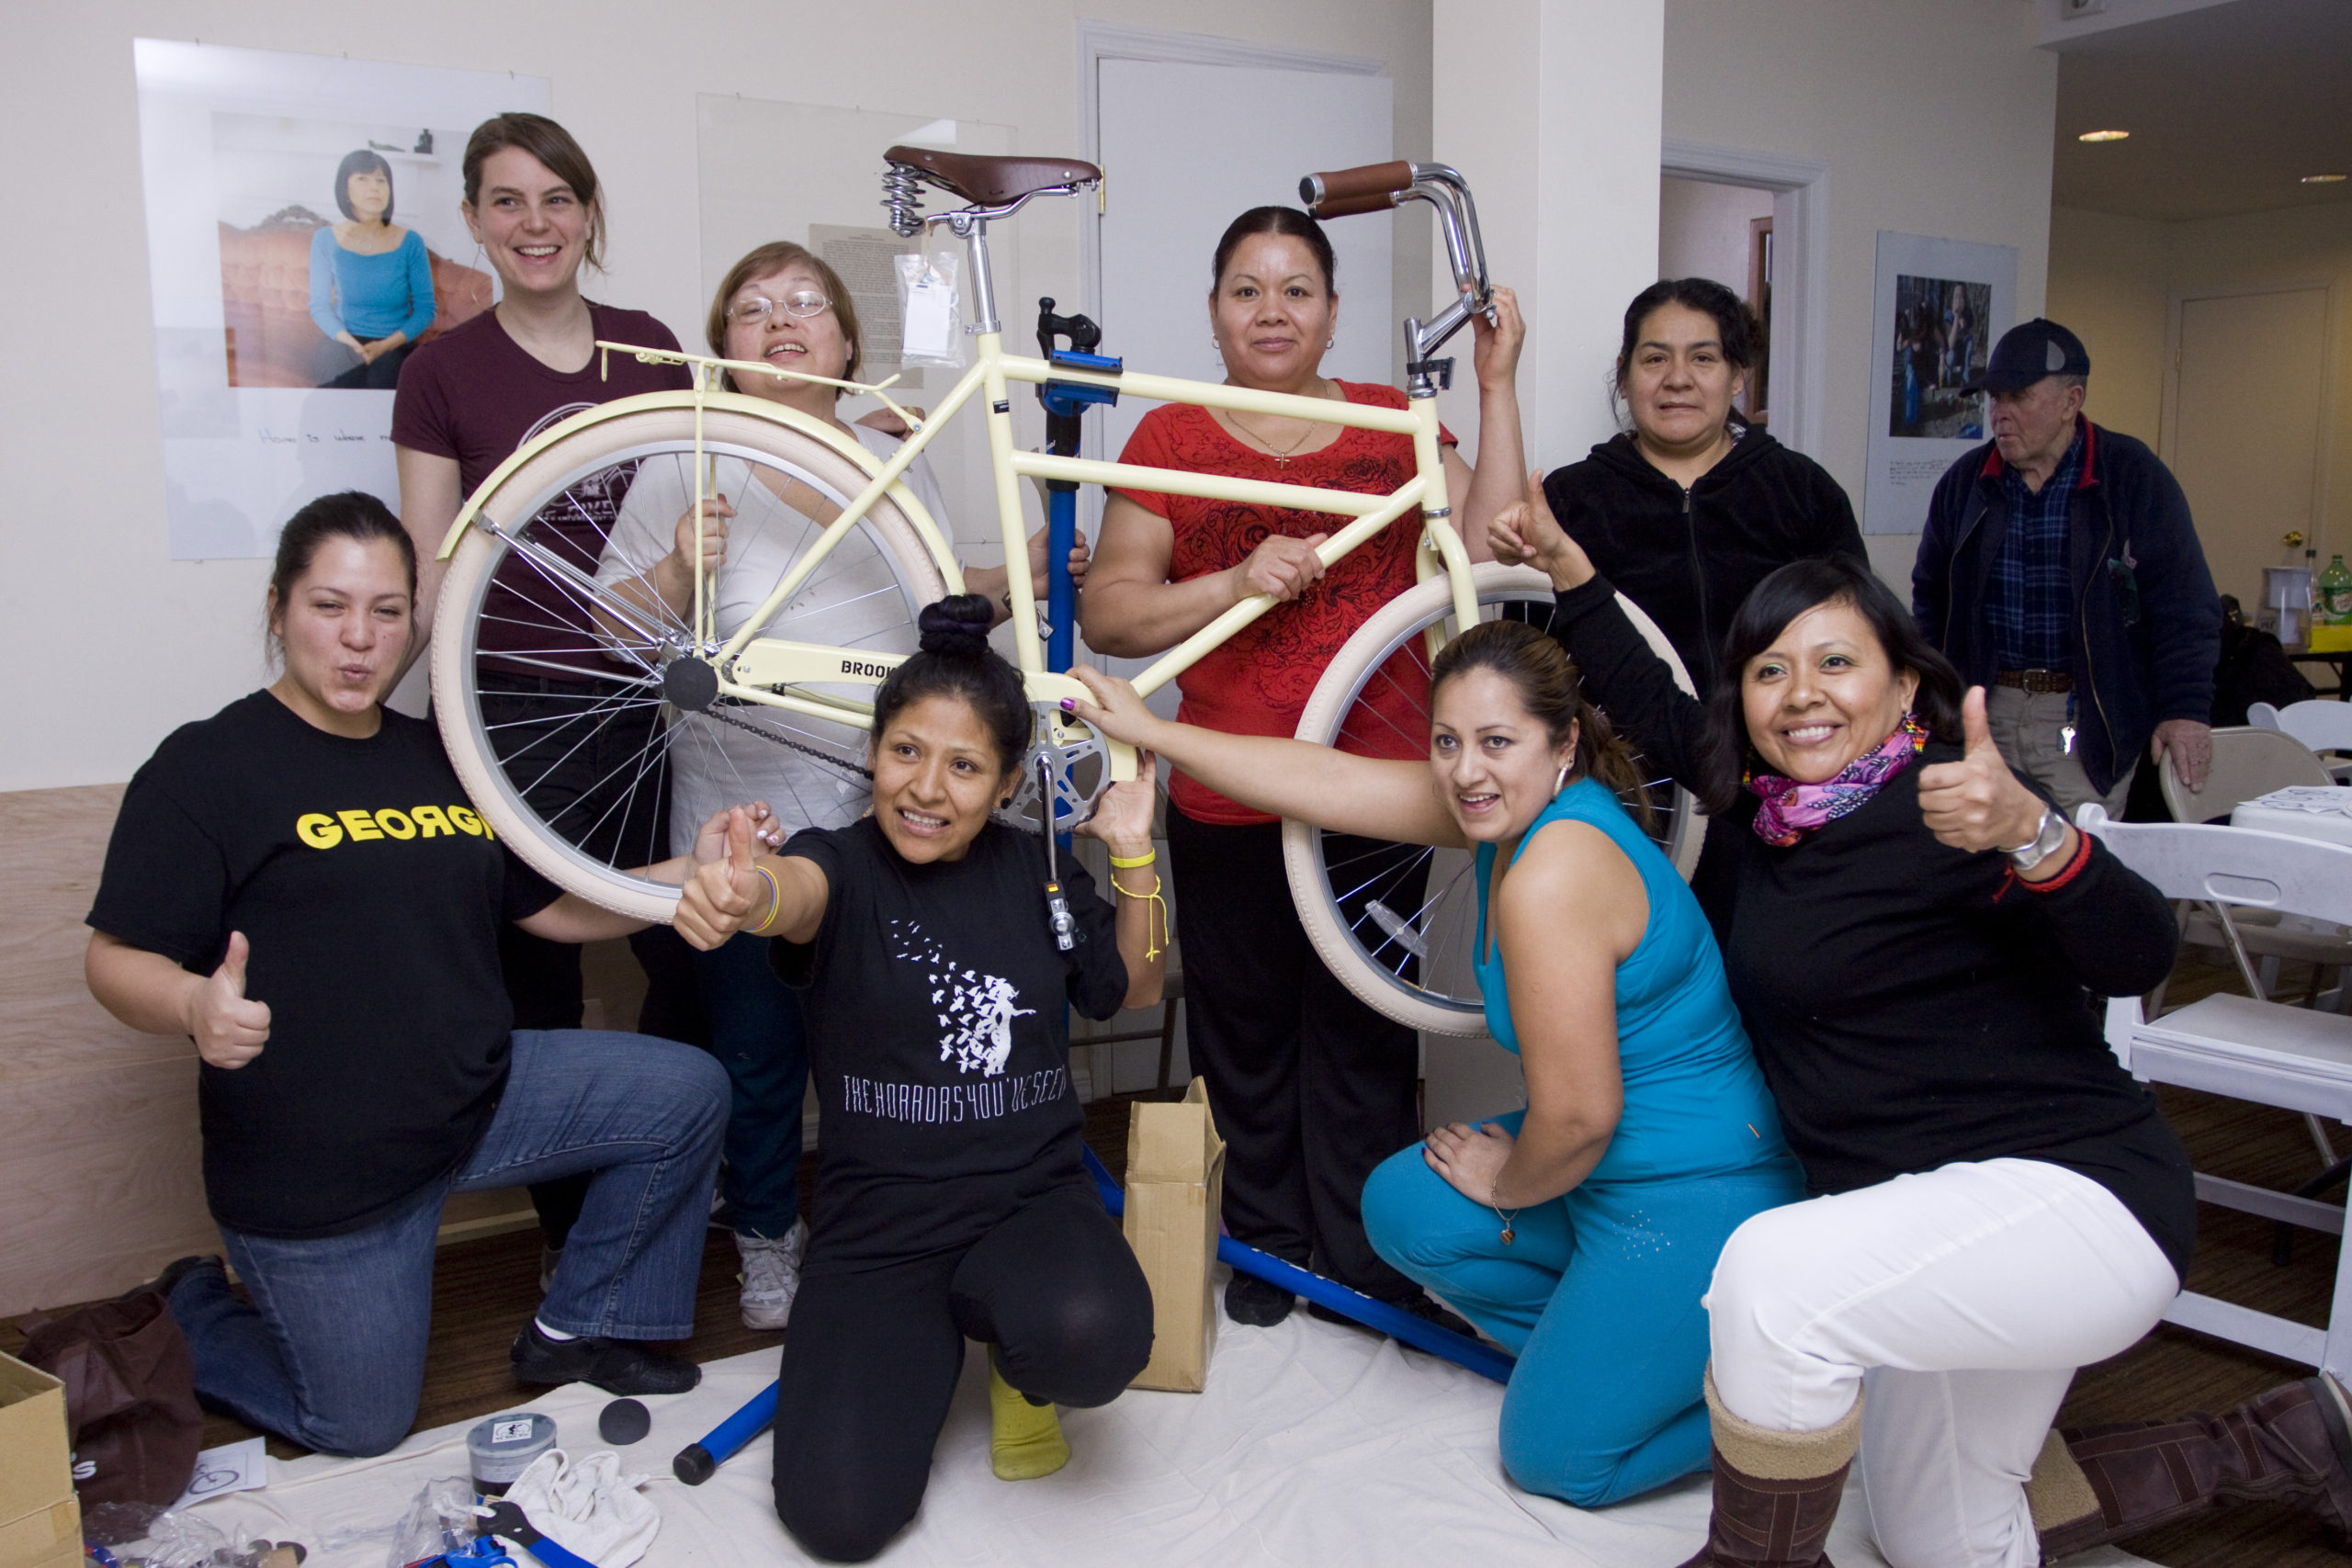 A group of women pose for a photo in a workshop space. They are gathered around, and holding up, a cream colored bike. In the background are white walls displaying art and an elderly man standing beside a table with folding chairs.